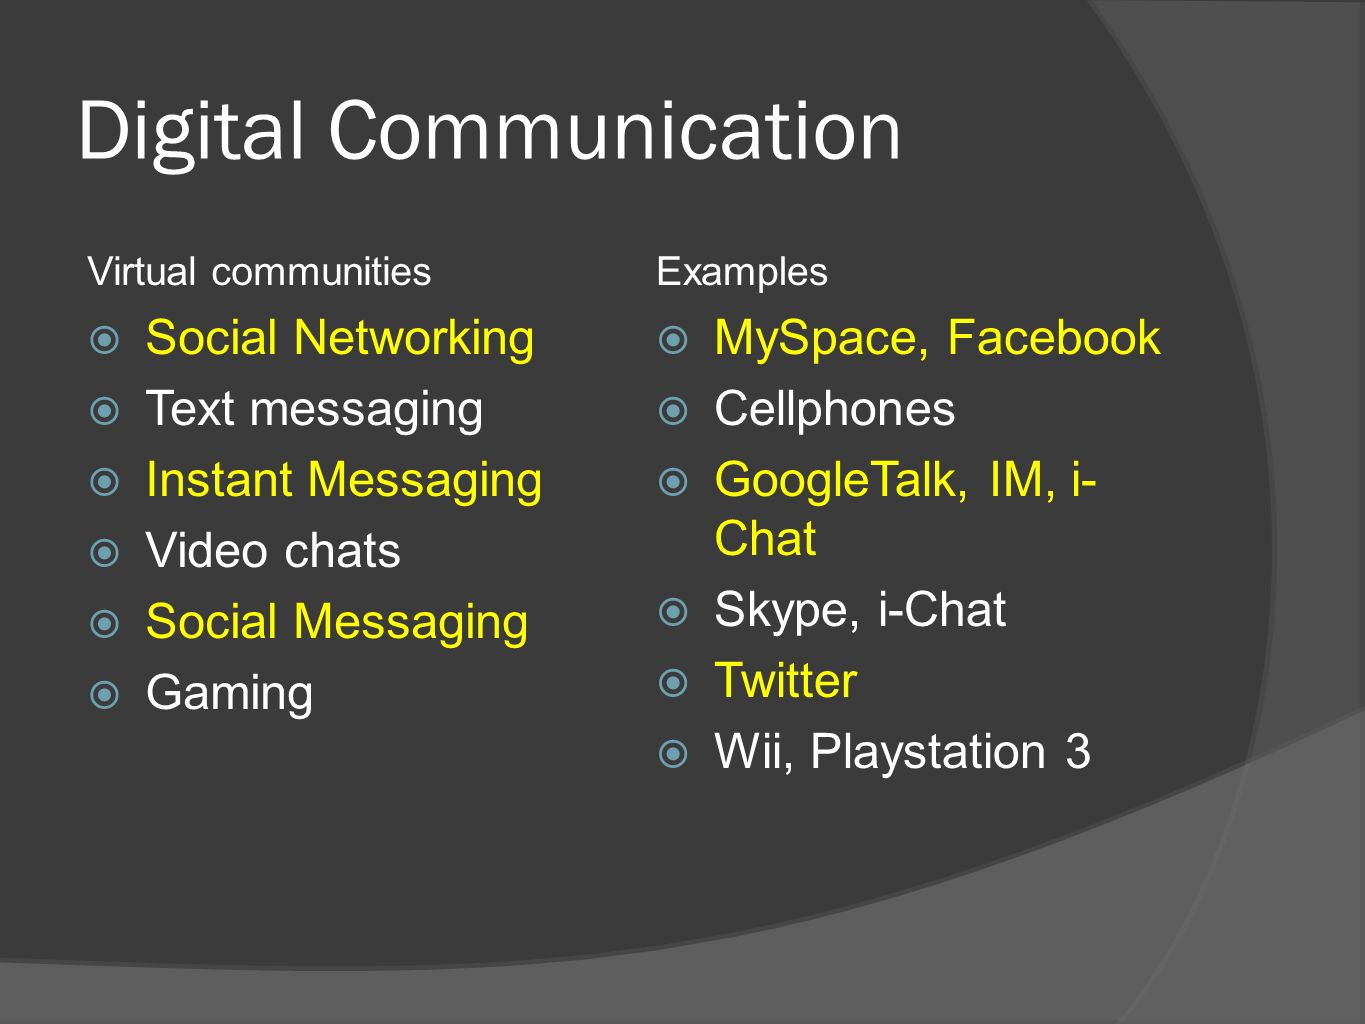 Digital Communication Virtual communities  Social Networking  Text messaging  Instant Messaging  Video chats  Social Messaging  Gaming Examples  MySpace, Facebook  Cellphones  GoogleTalk, IM, i- Chat  Skype, i-Chat  Twitter  Wii, Playstation 3